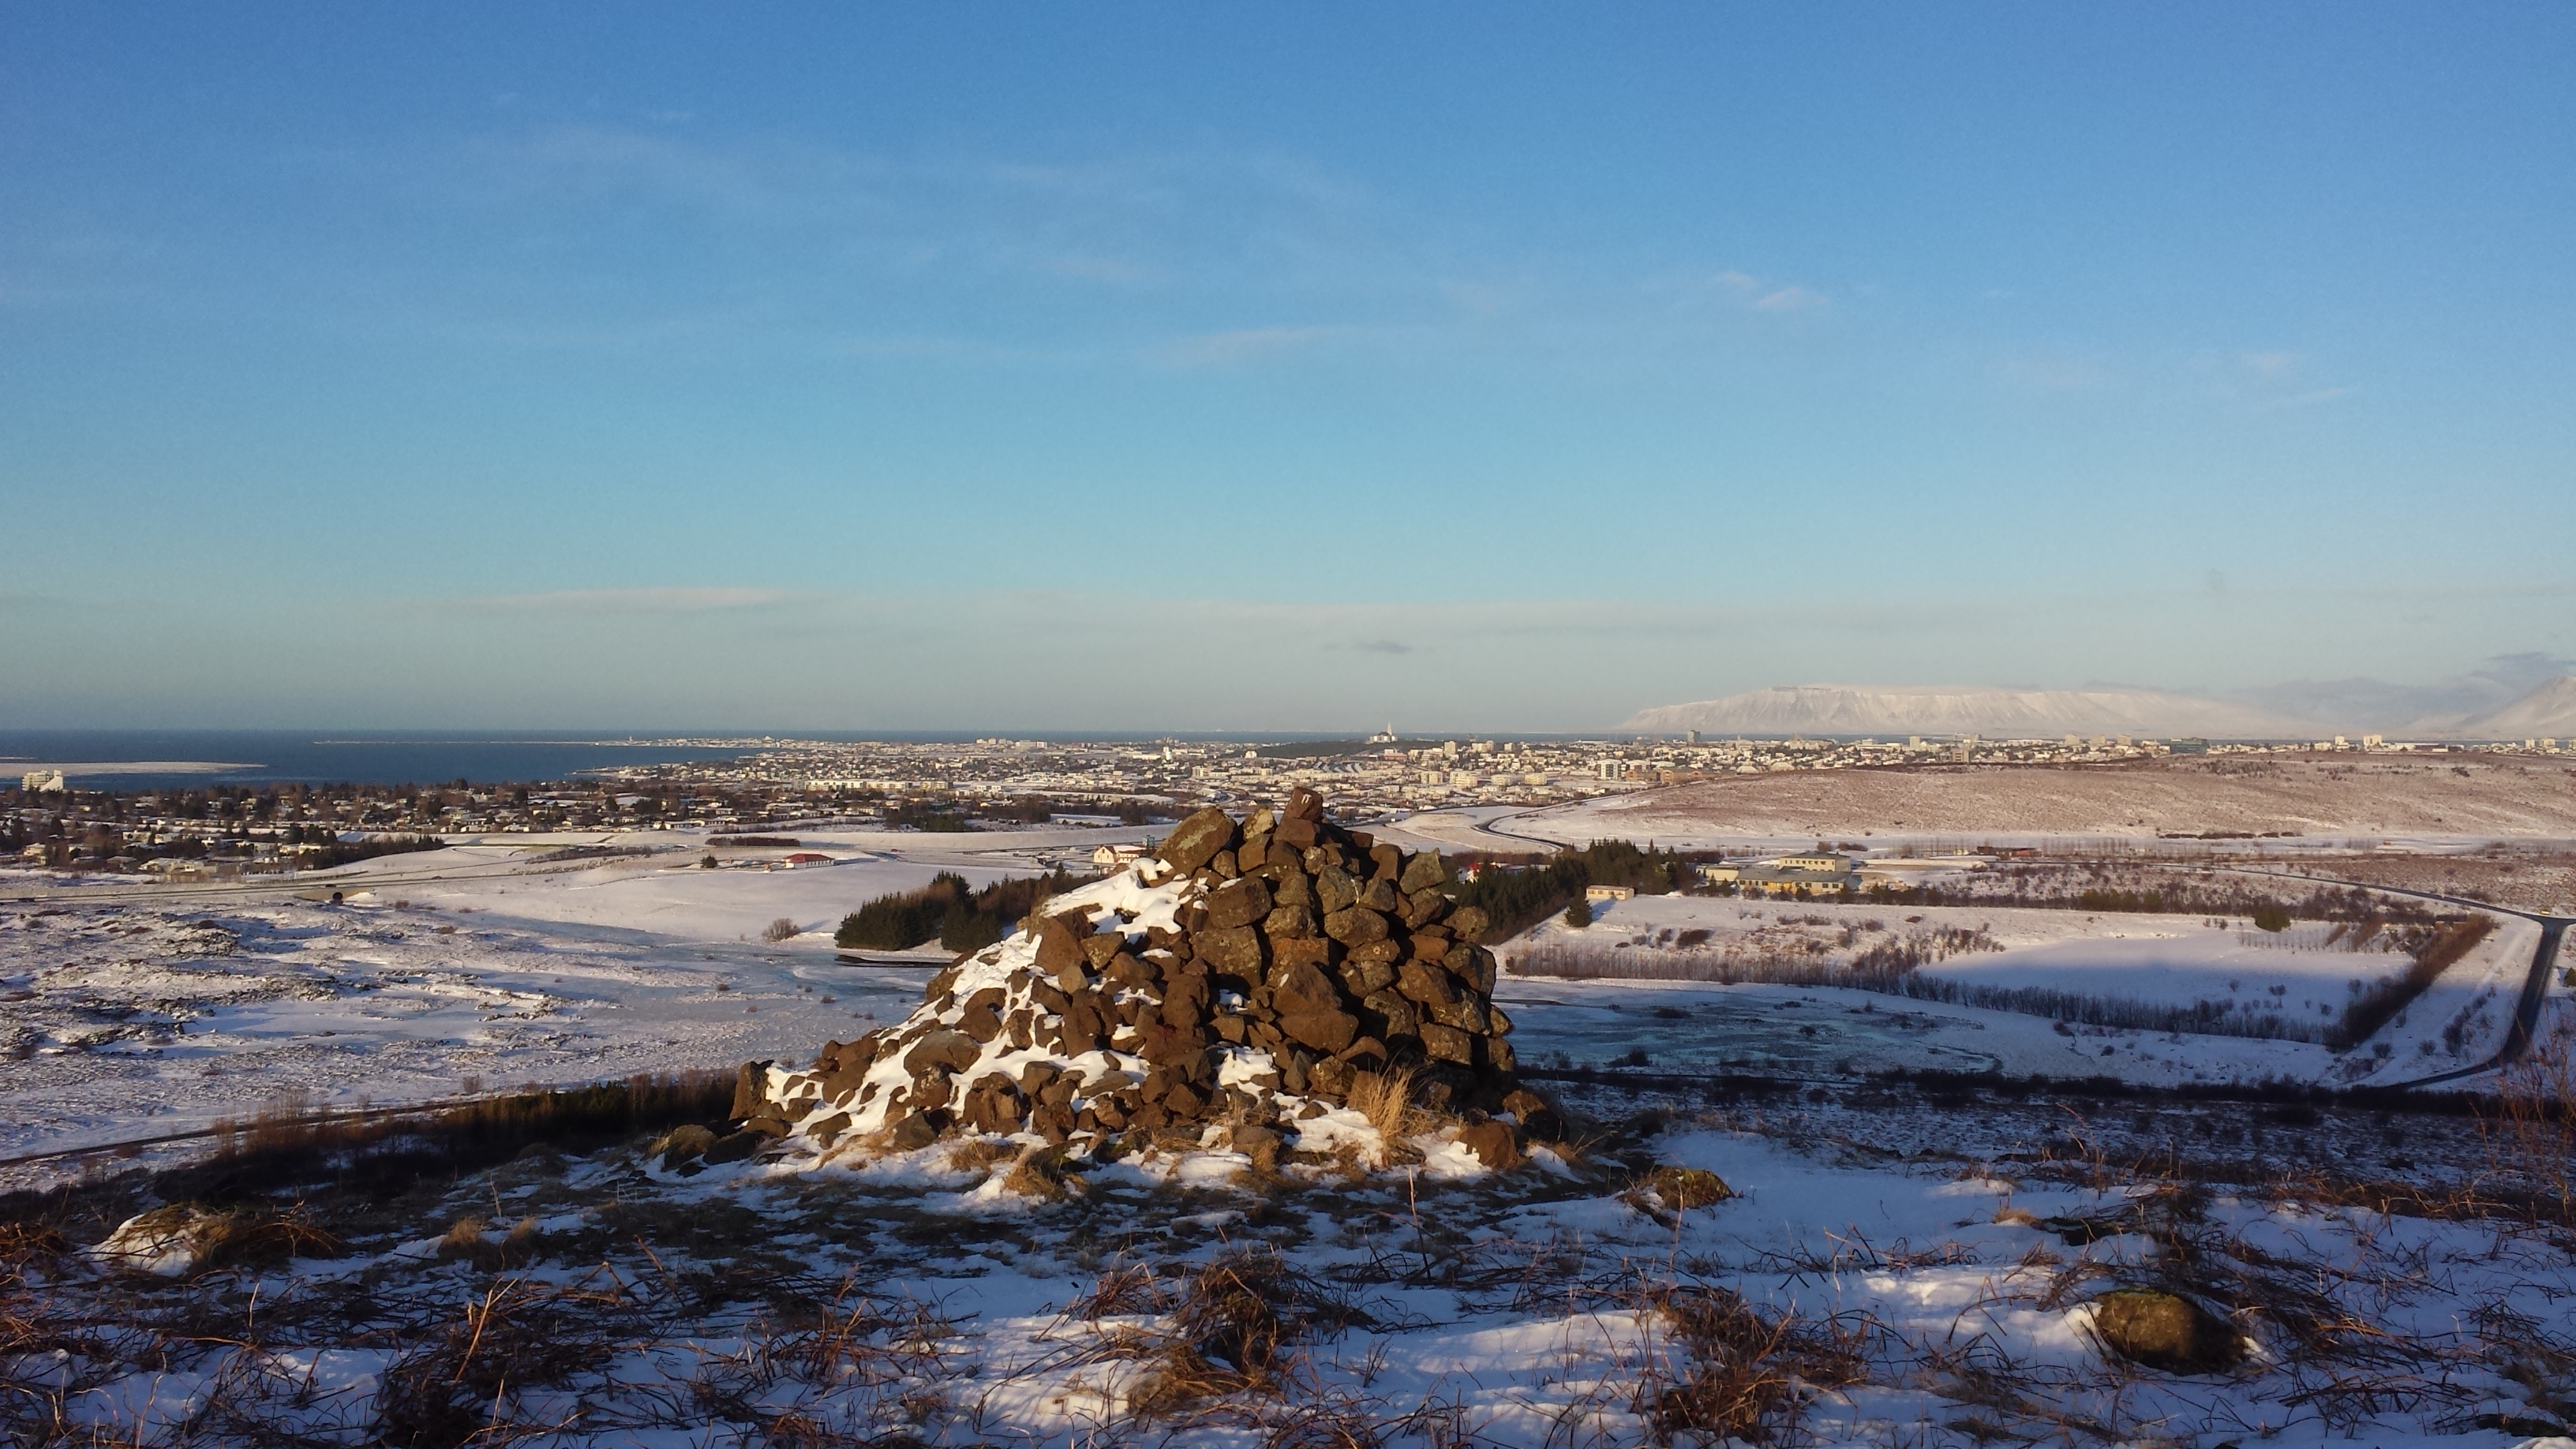 Hiking up to the Cairn Gunnhildur gives excellent view towards the Reykjavik area. 